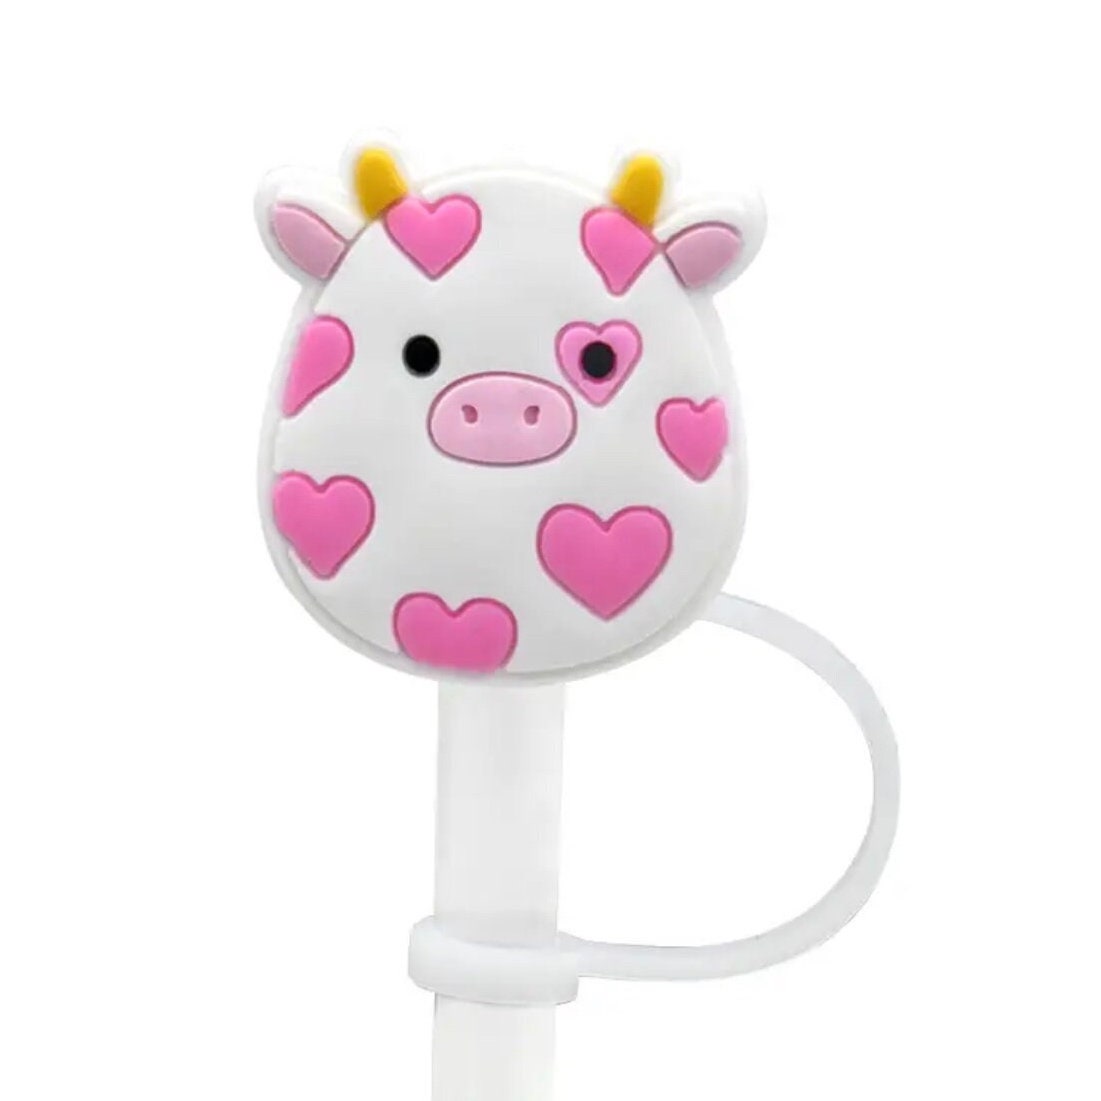 Cute Cow Straw Cover Topper Silicone Accessories Cover Charms Reusable  Splash Proof Drinking Dust Plug Decorative DIY Your Own 8mm Straw From  Amandagogogo2022, $0.22